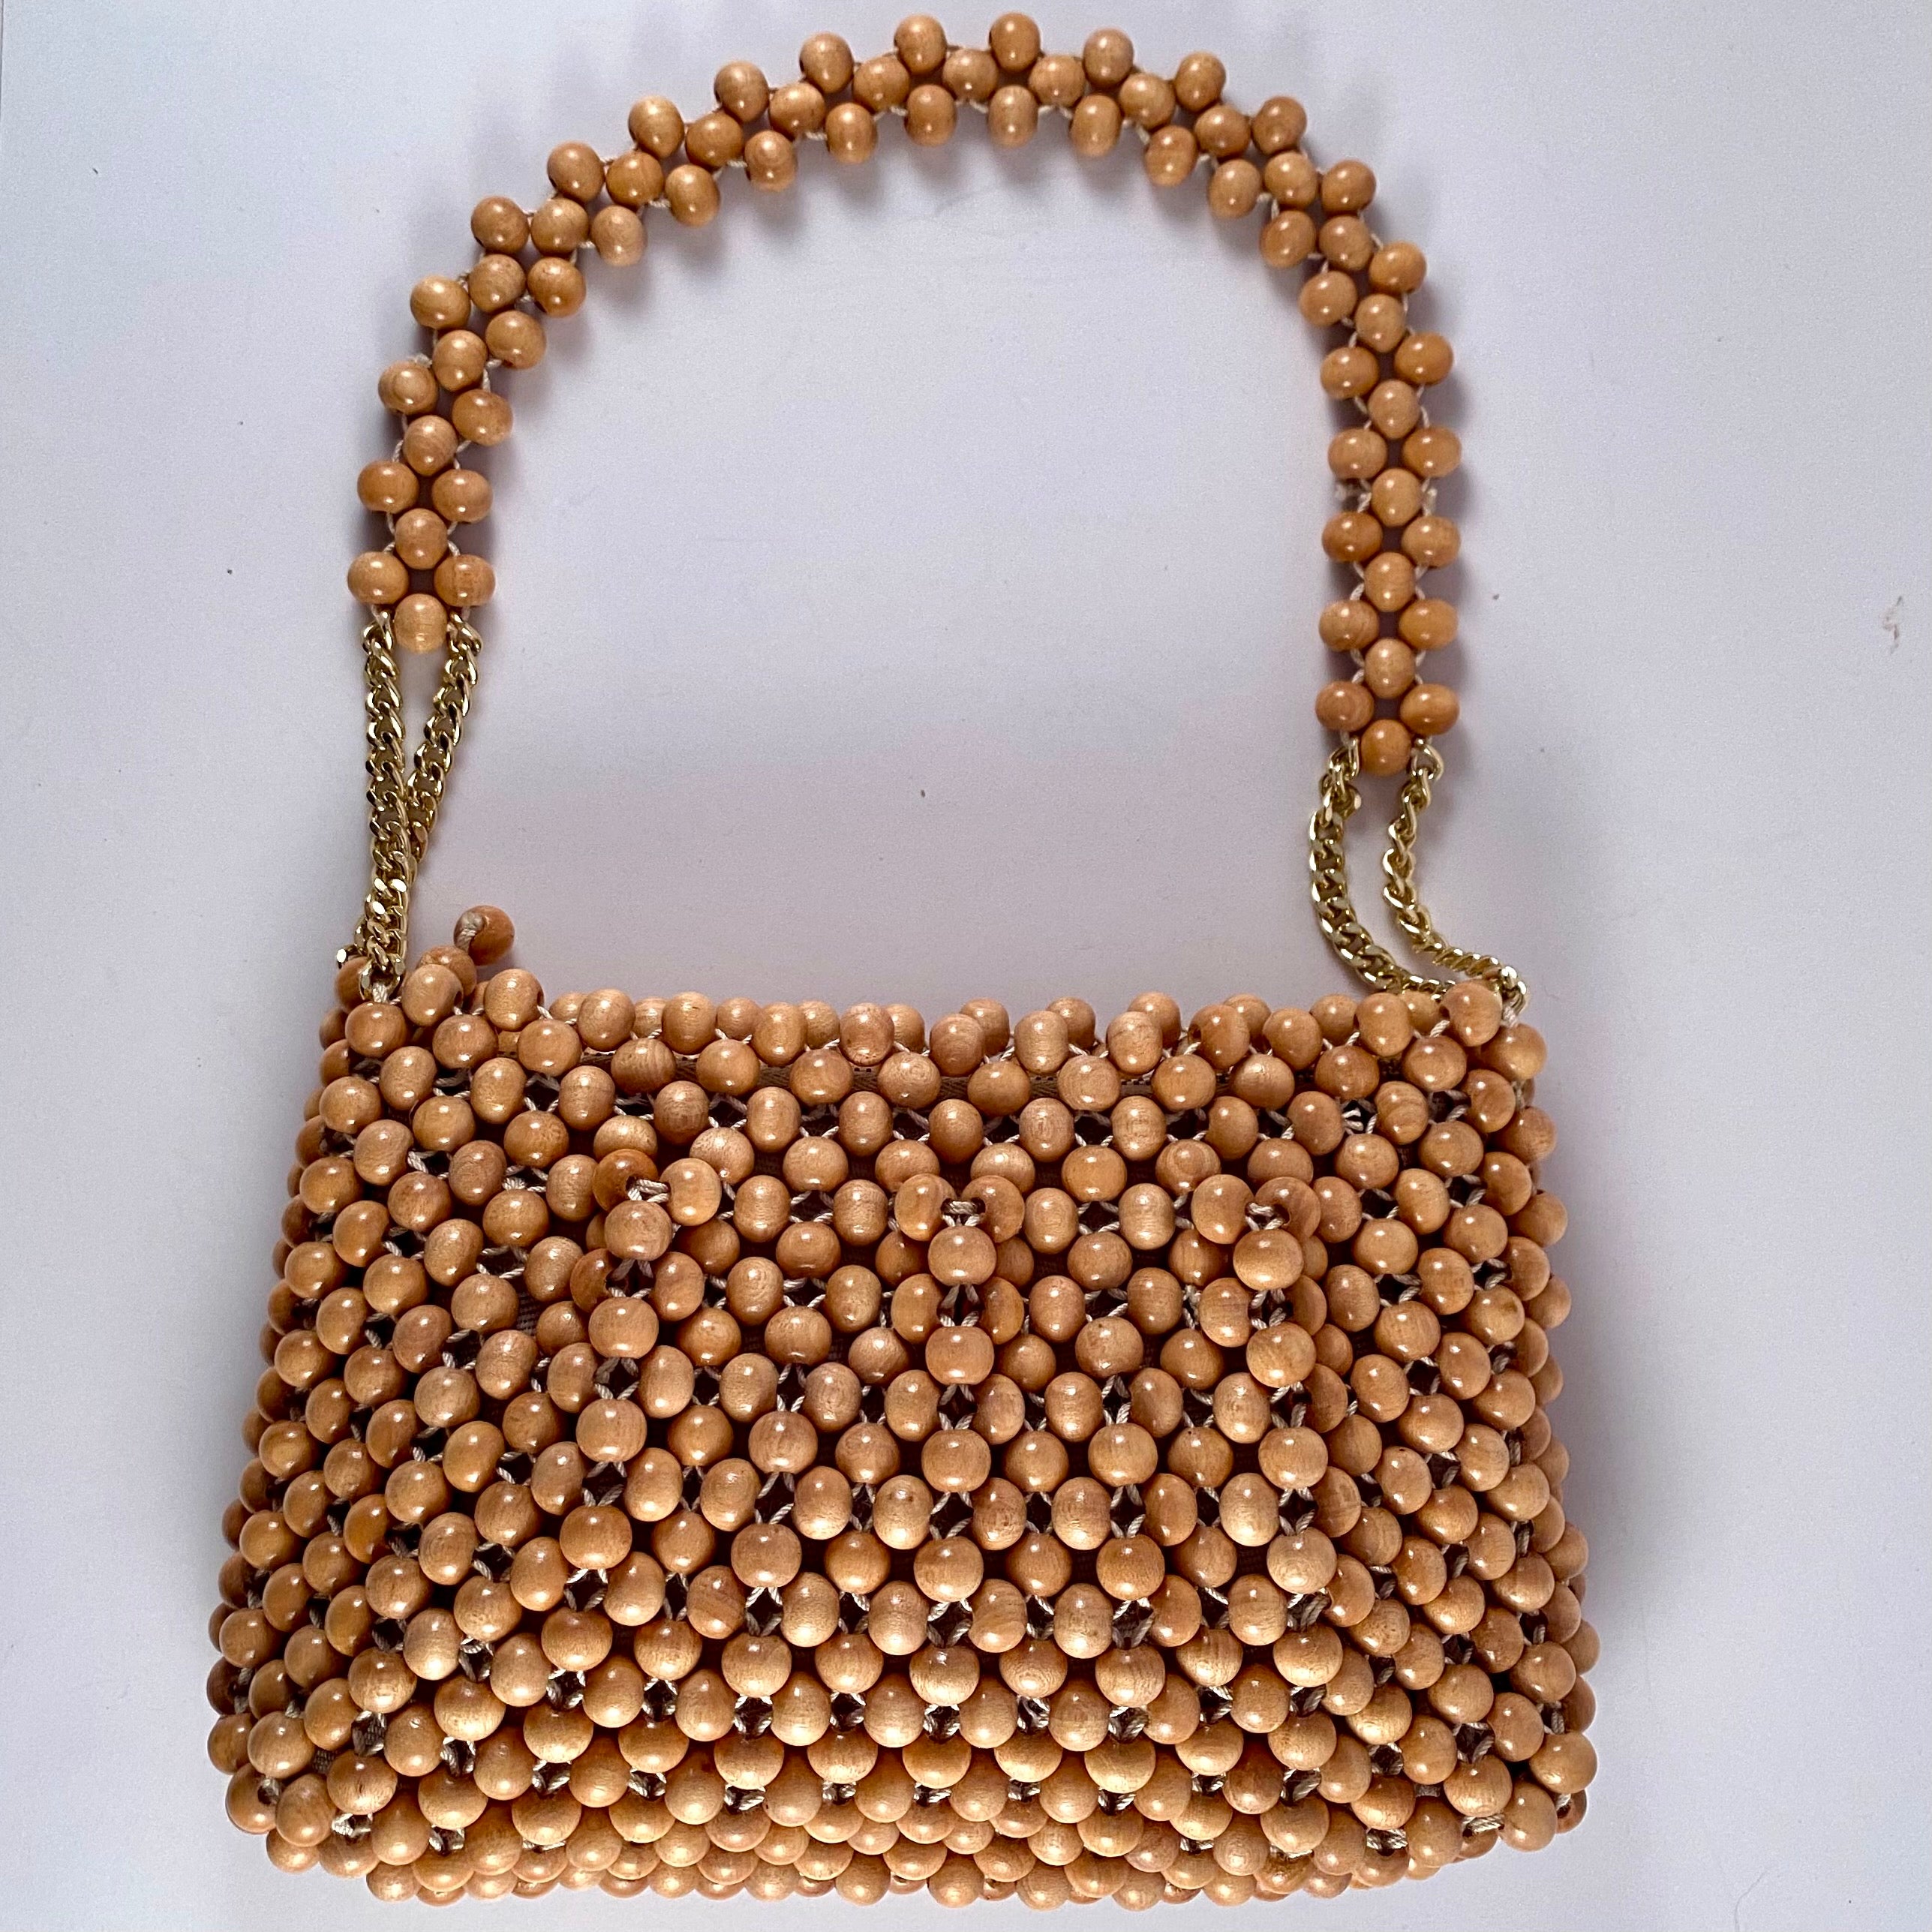 Wooden Beaded Purse With Chain and Wood Bead Strap Zip Closure Vintage  Handbags Ltd. Made in Japan Vintage Brown Wood Beads Purse Vintage - Etsy